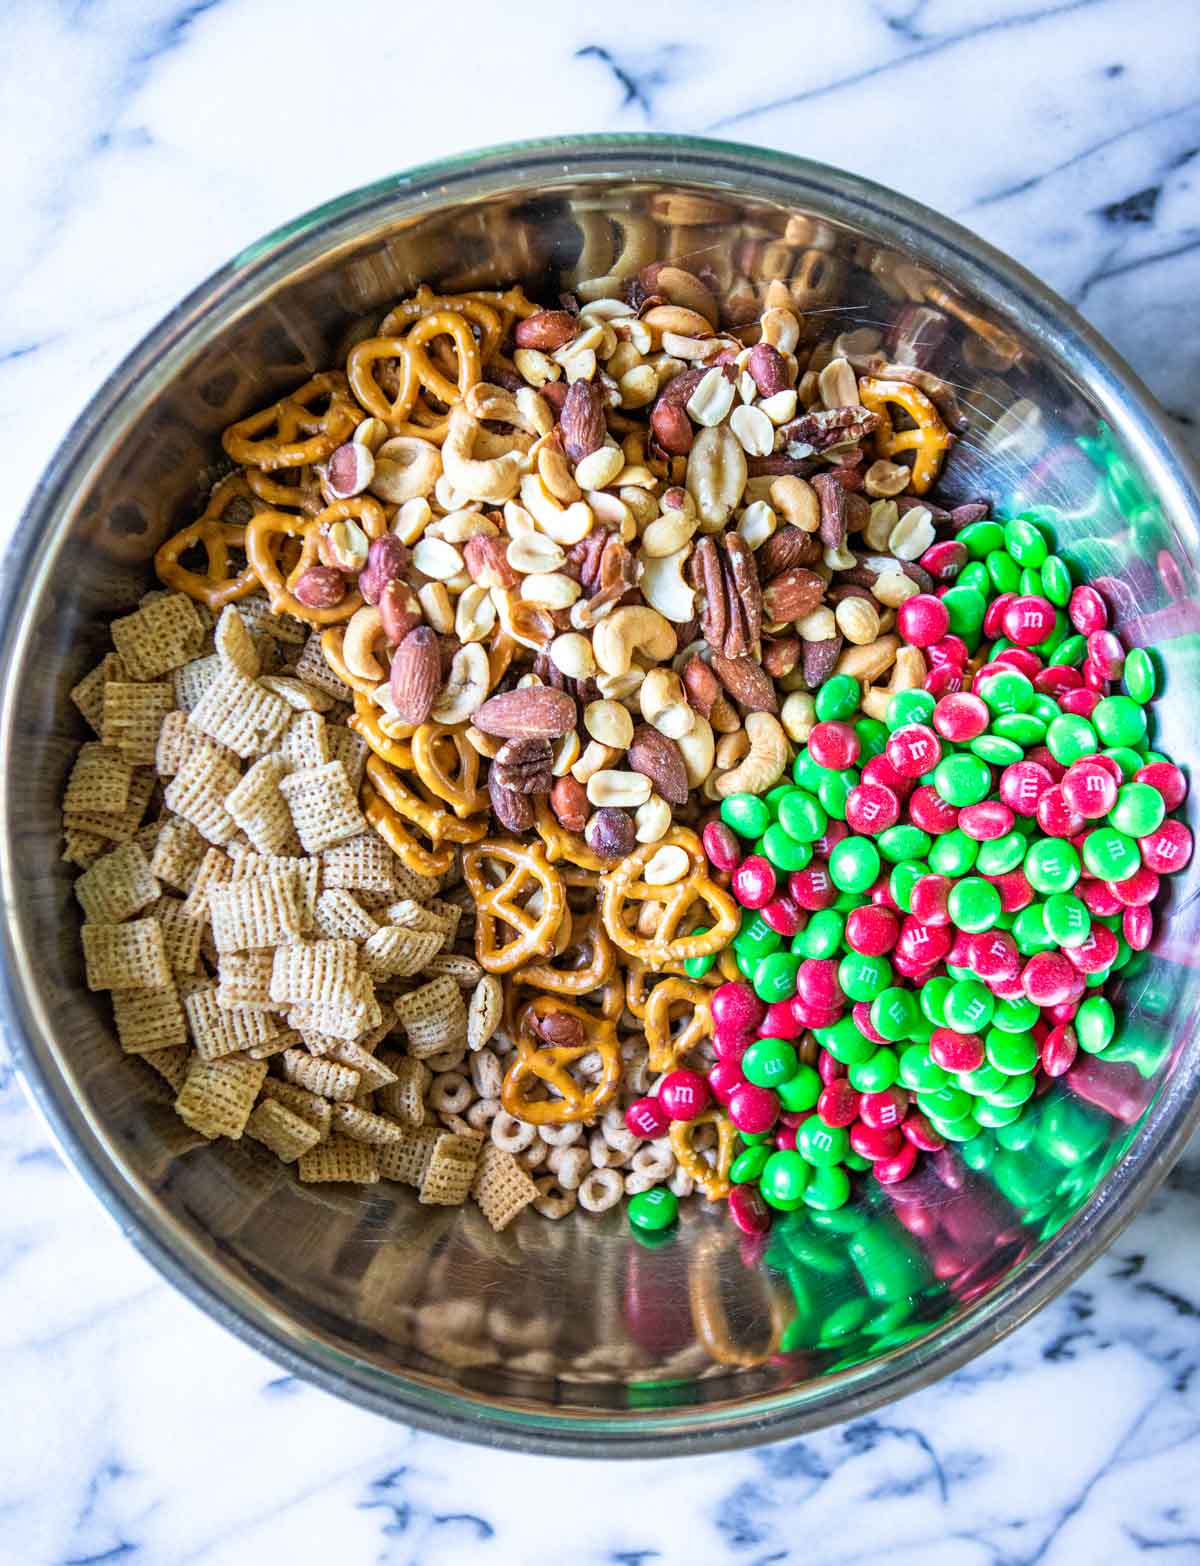 cereals, nuts and candy in a large mixing bowl